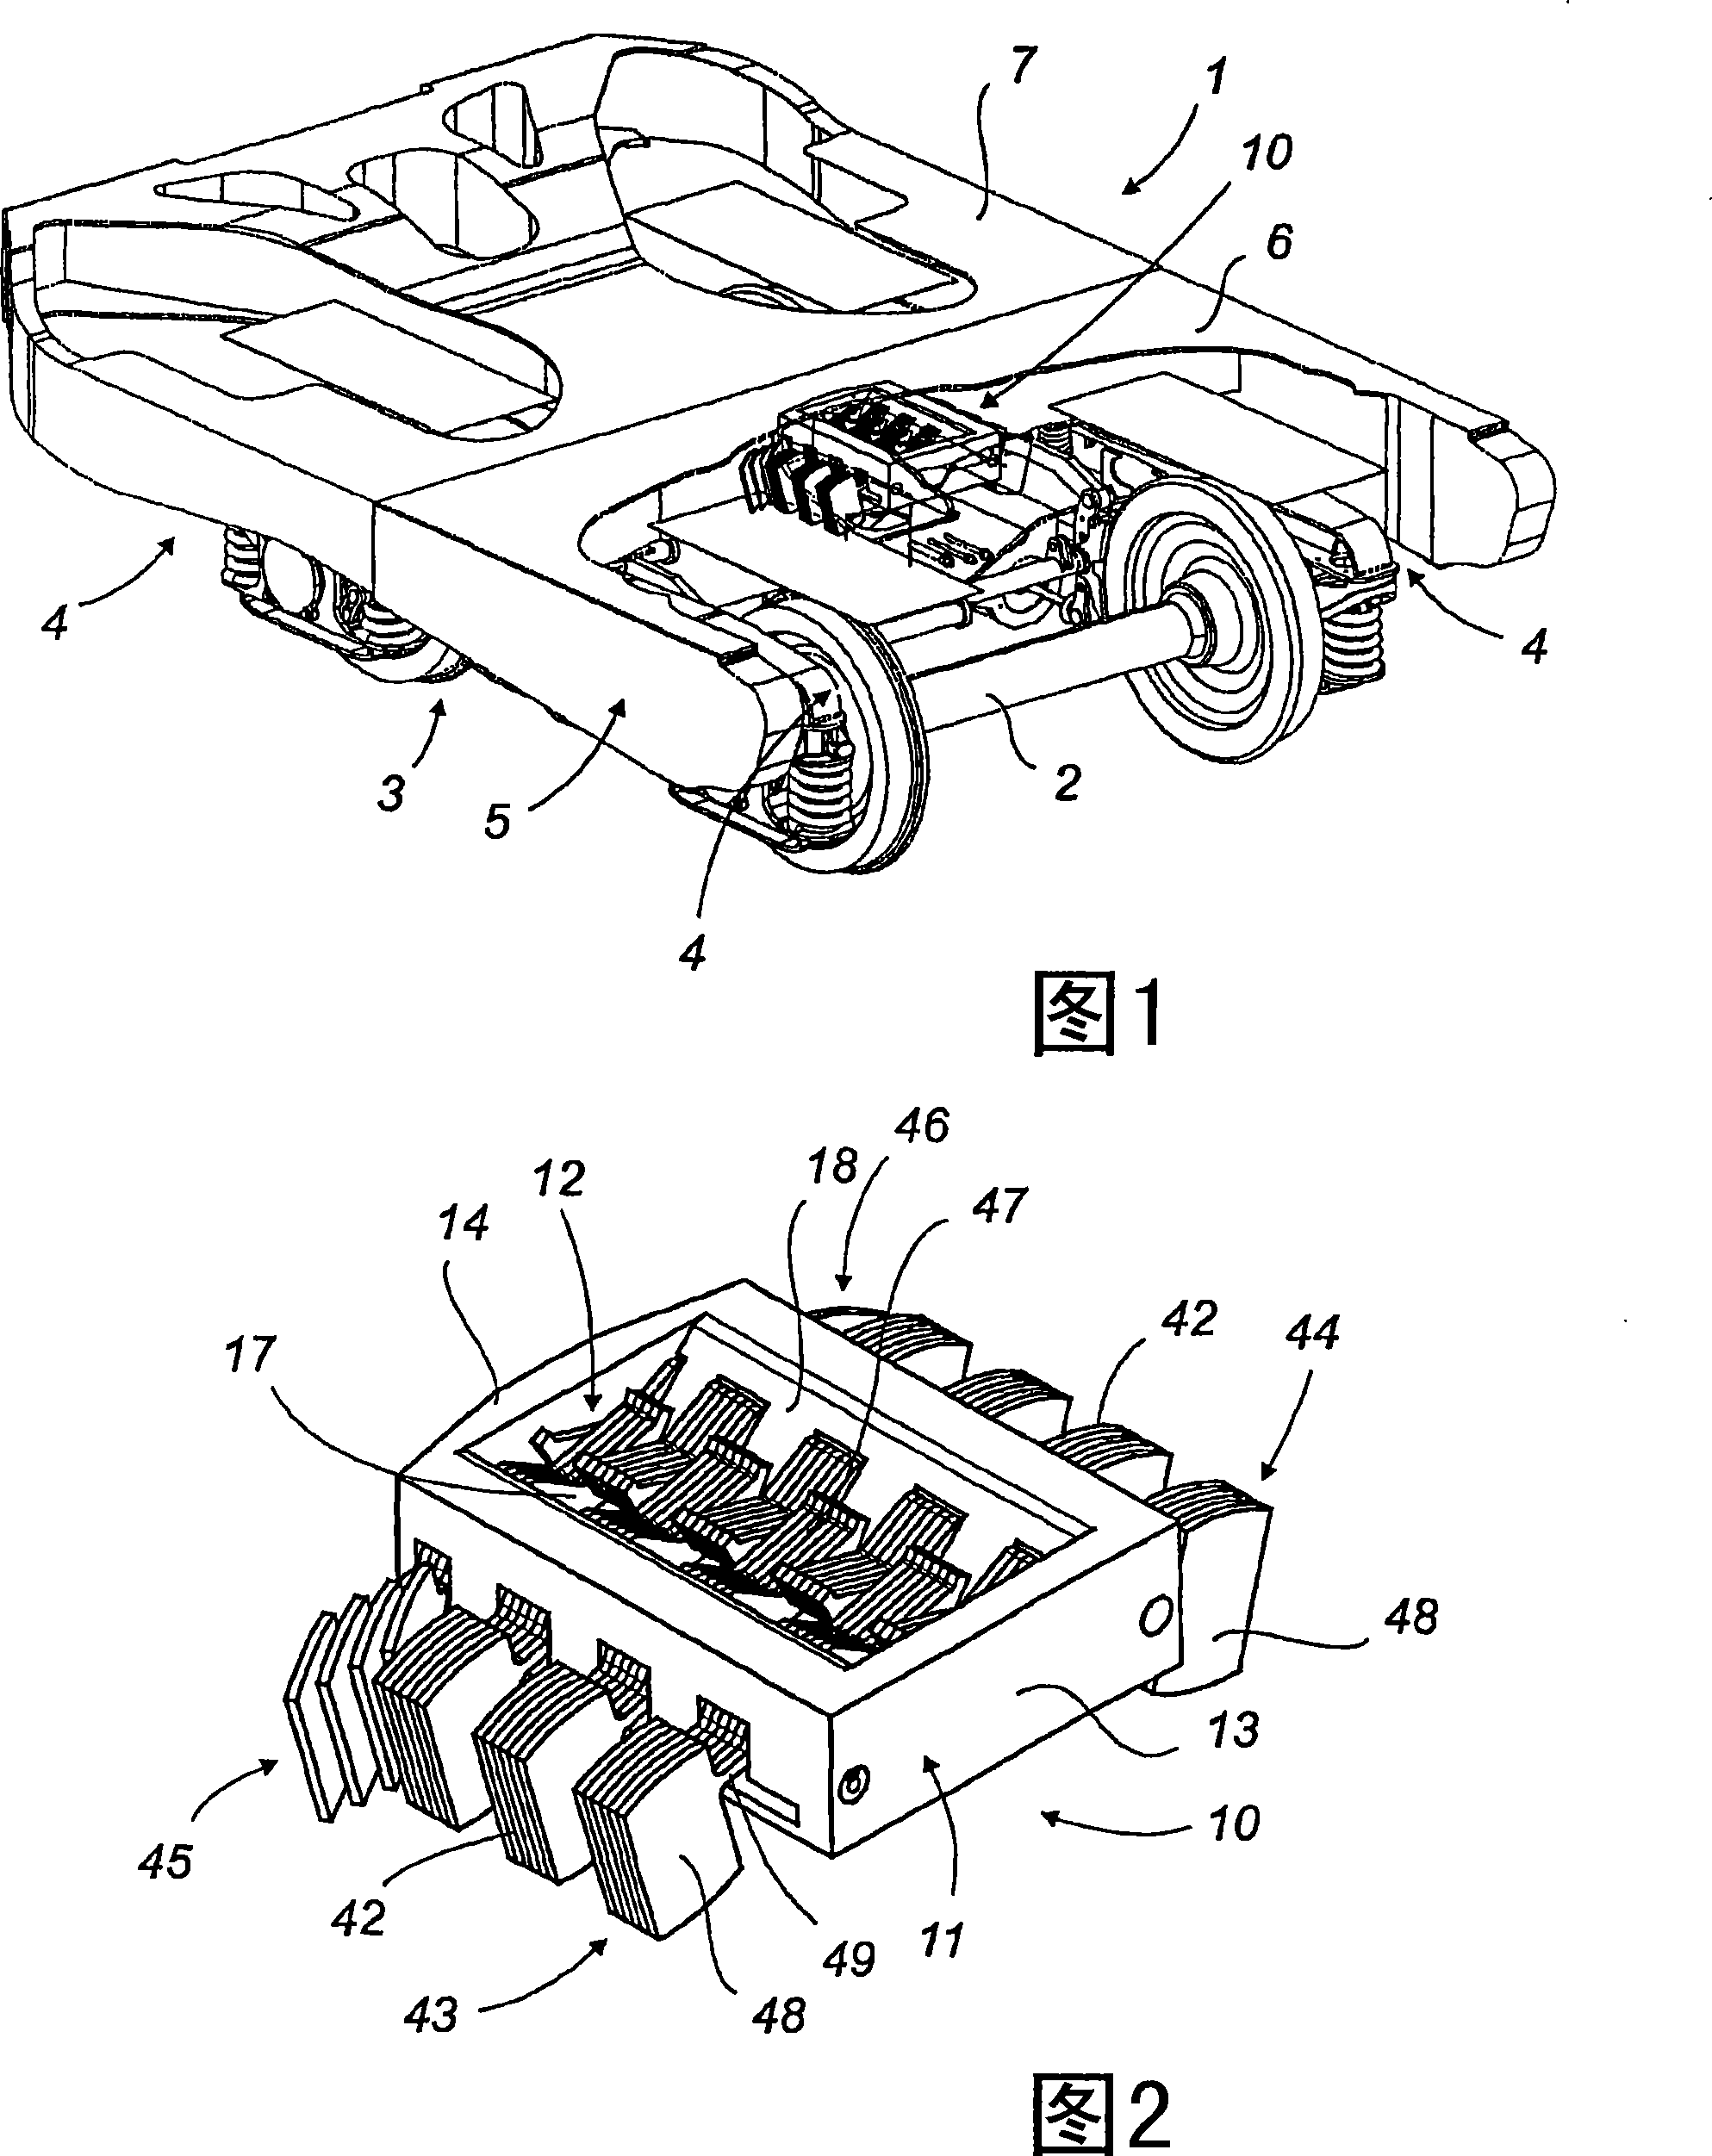 Device for lateral self-centering support and immobilization on a railway structure of a semi-trailer kingpin